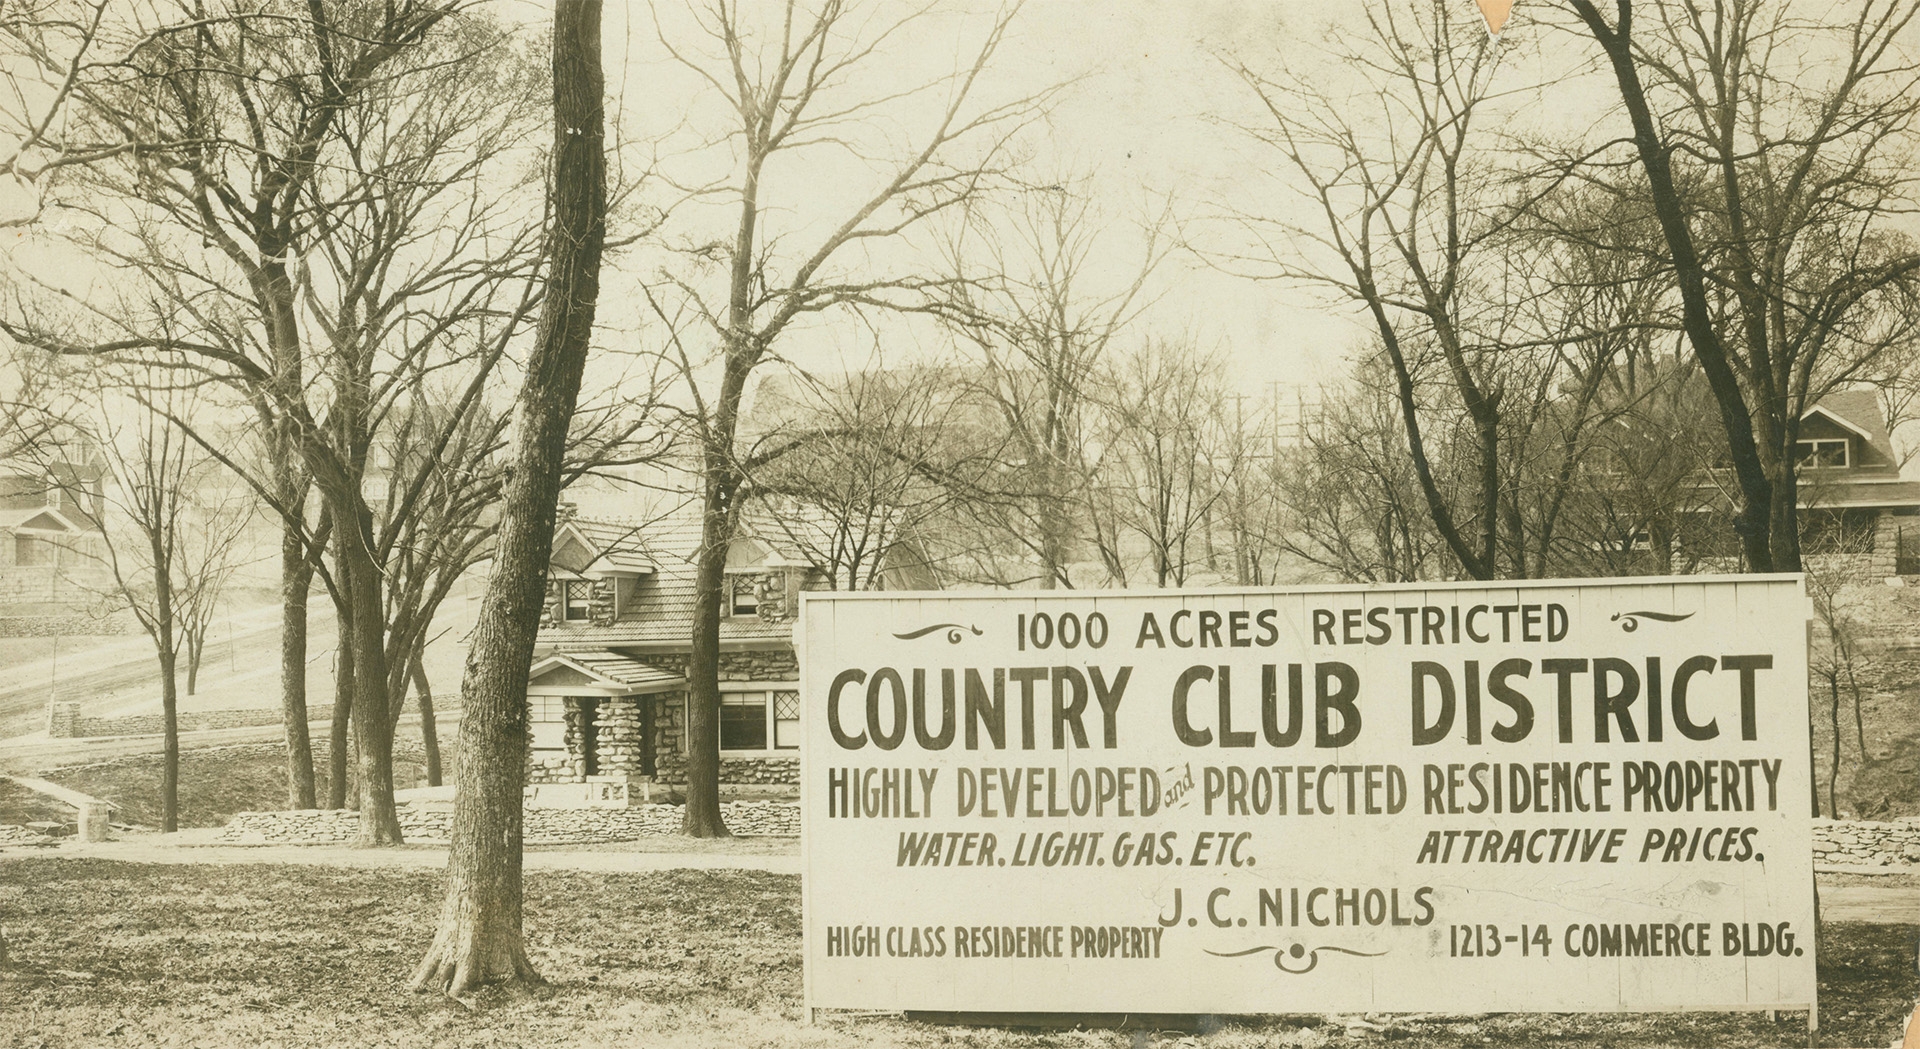 The Country Club District is a series of upscale residential neighborhoods outside of Kansas City, Missouri. Developer J. C. Nichols included racially restrictive covenants on home deeds, preventing African Americans from purchasing homes.